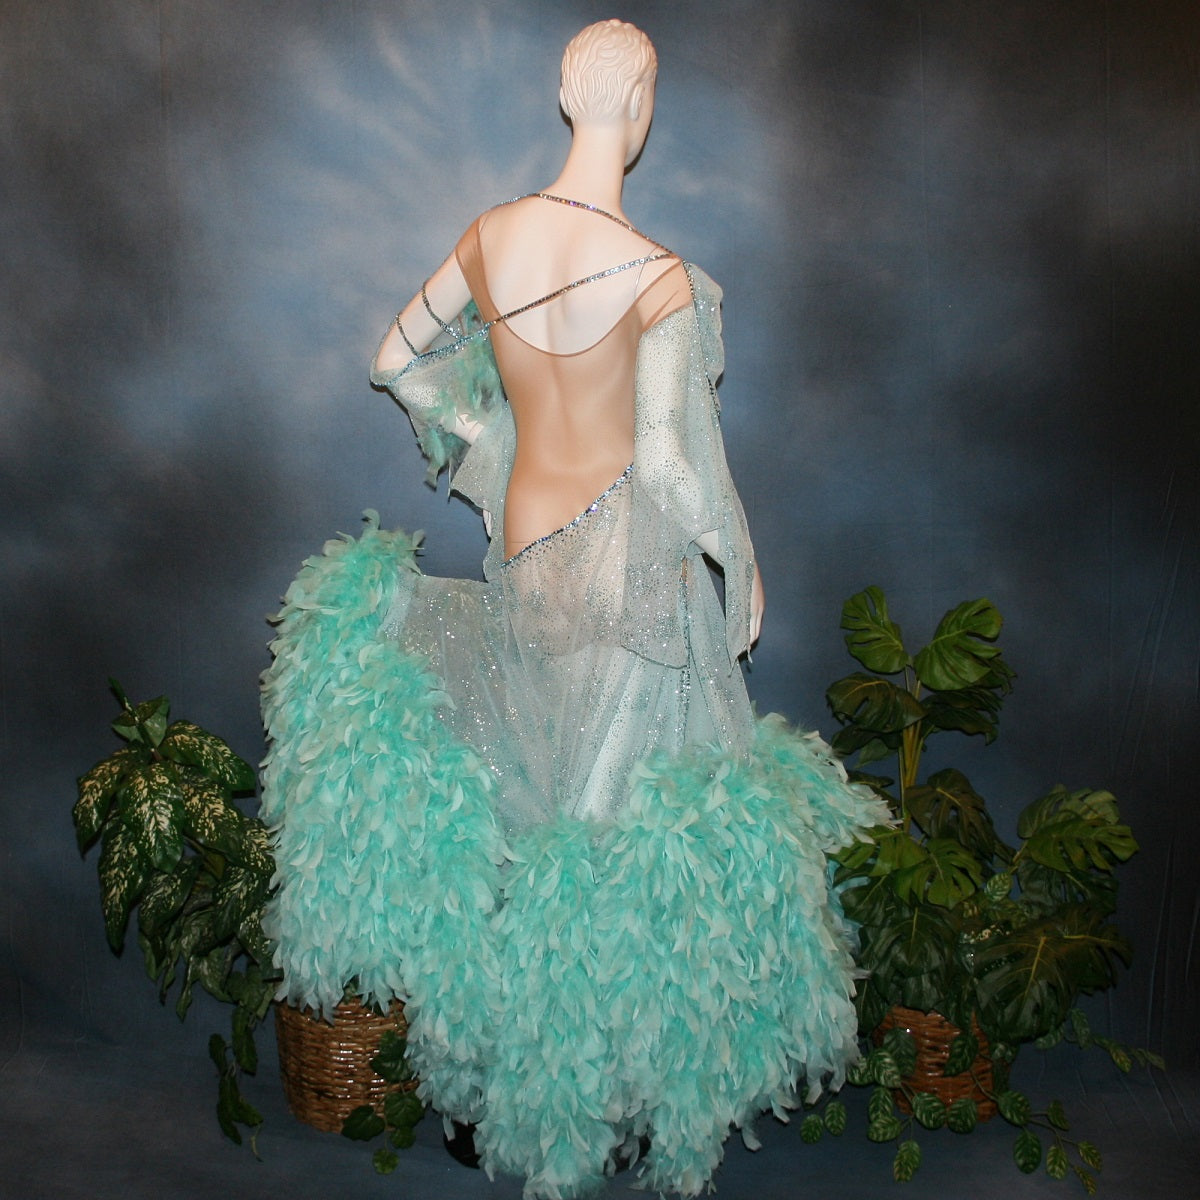 Crystal's Creations back view of Aqua blue ballroom dress created in gorgeous aqua blue glitter sheer mesh overlaid on a nude illusion base has lots of gorgeous aqua chandelle feathers, embellished with aquamarine Swarovski rhinestone work. This ballroom dress also features delicate Swarovski embellished strap detailing.